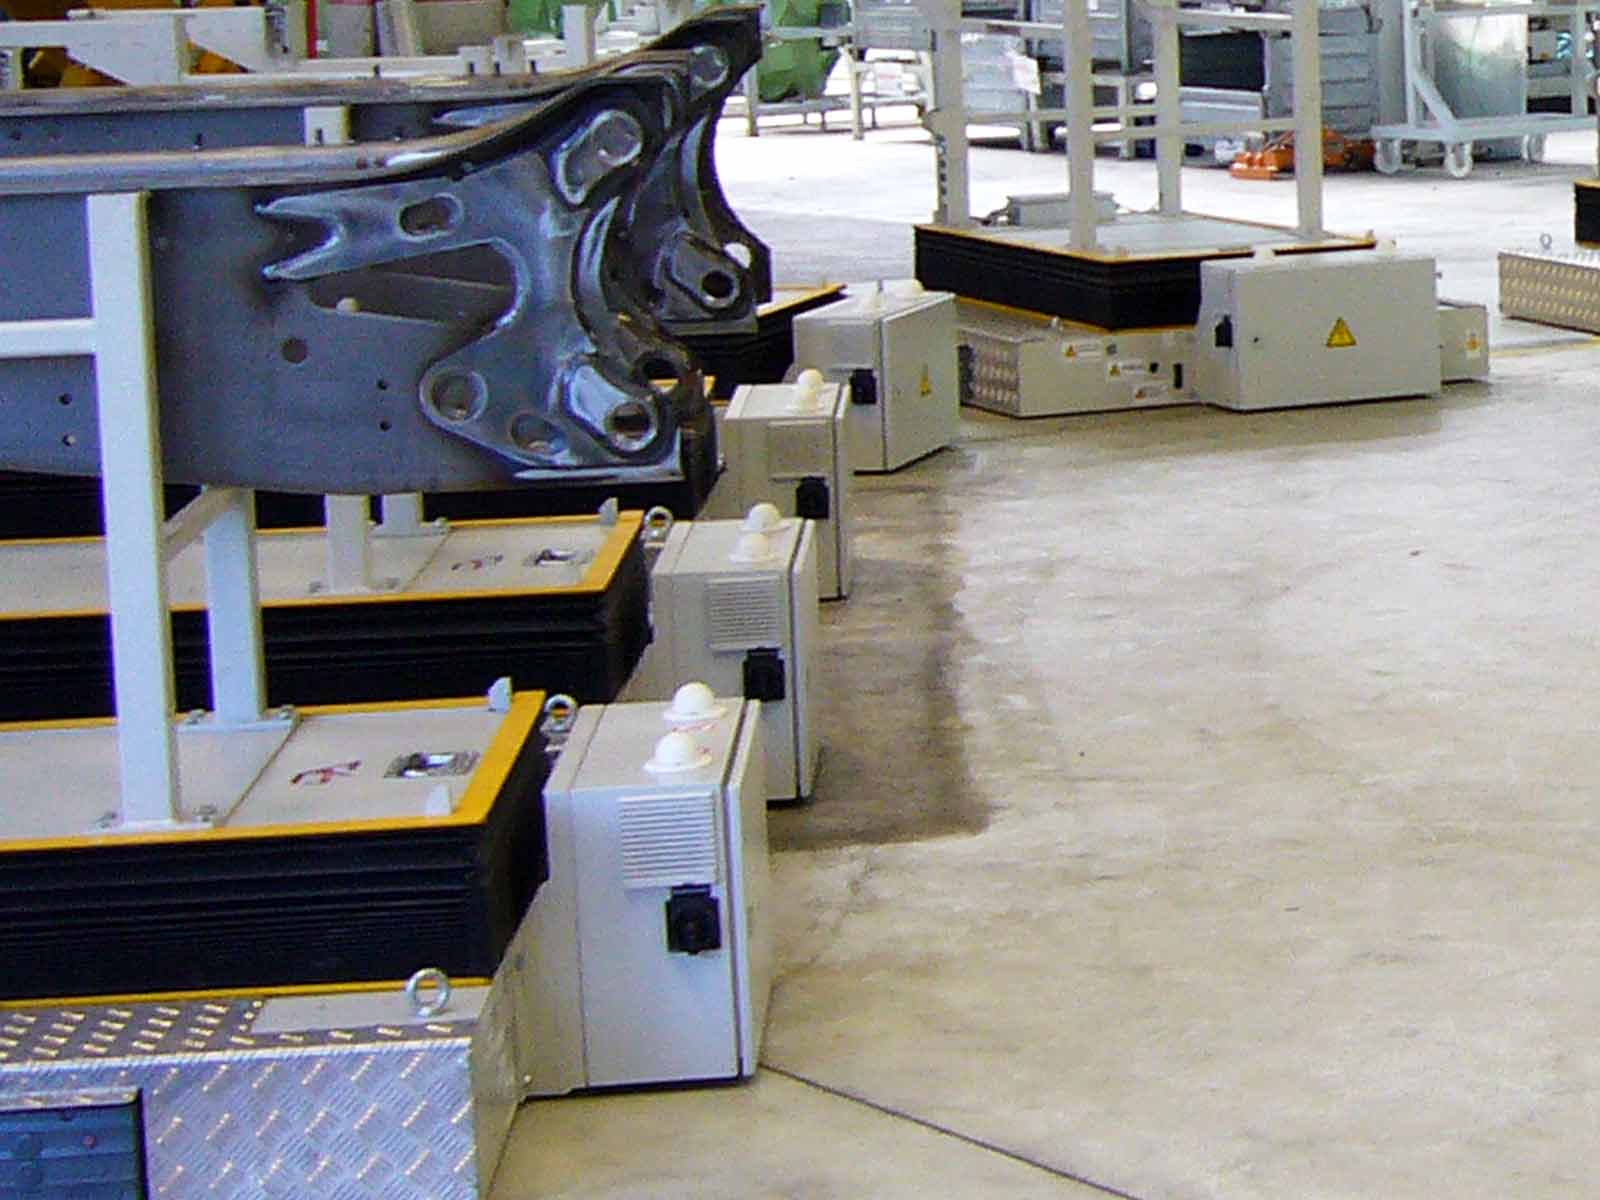 Automated Guided Vehicles (AGVs) and the radio data transmission system DATAEAGLE